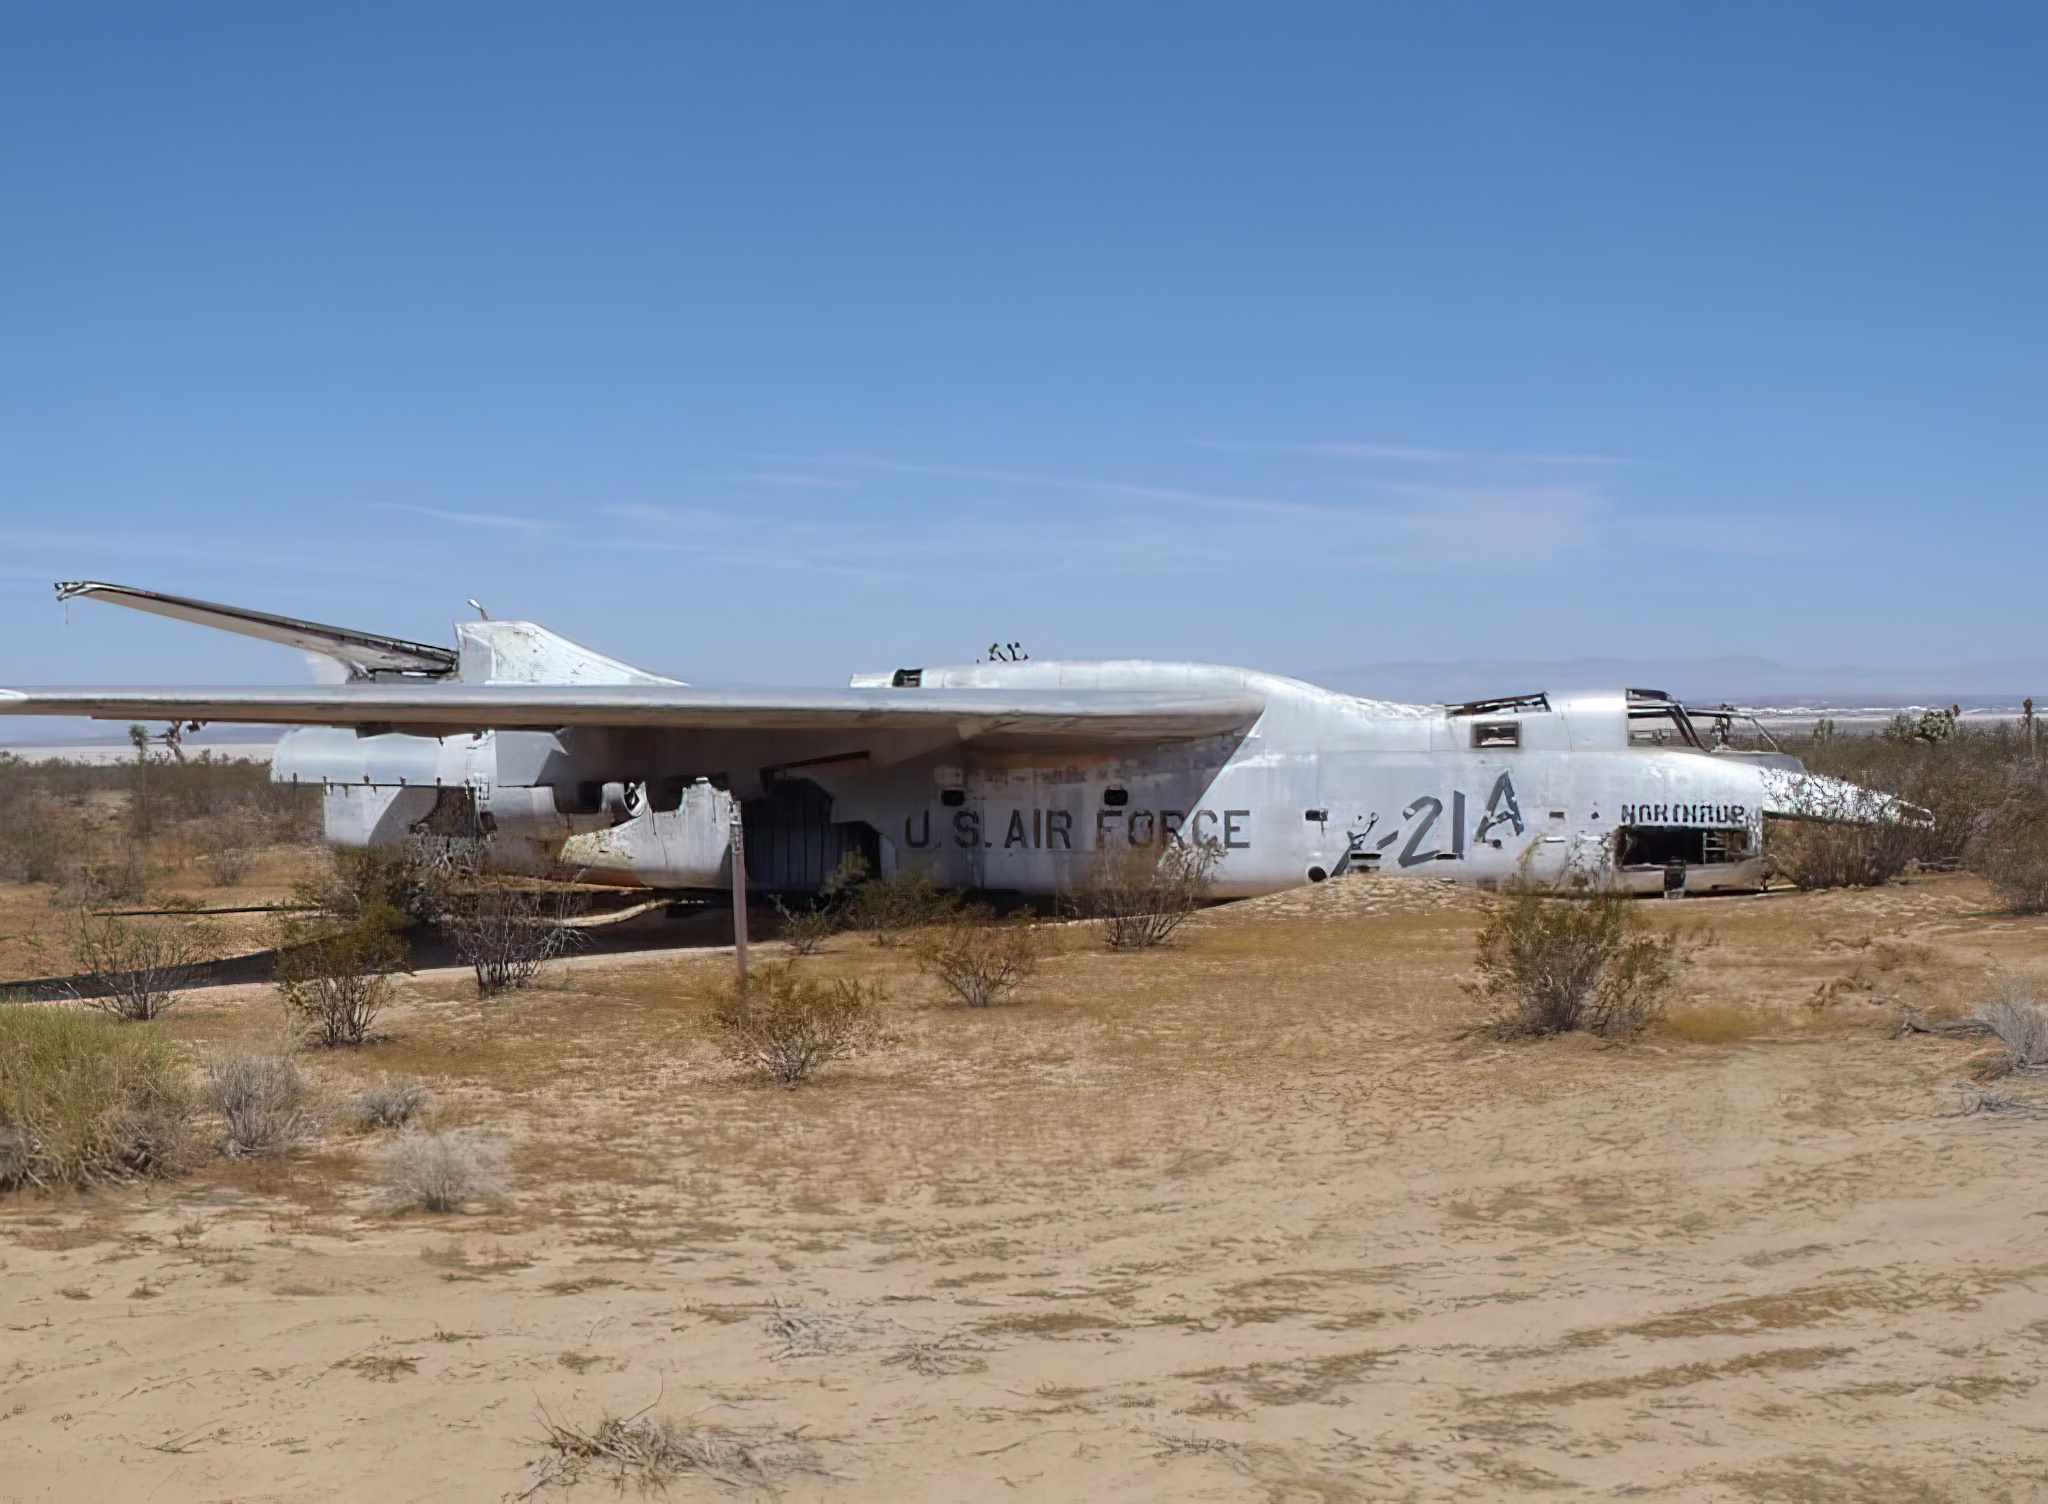 One of the X-21s in its current, derelict state. Note the folded vertical stabilizer, a feature developed for the carrier-borne A-3 Skywarrior from which the X-21 and the B-66 are derived. [Credit: Air Force Flight Test Museum]